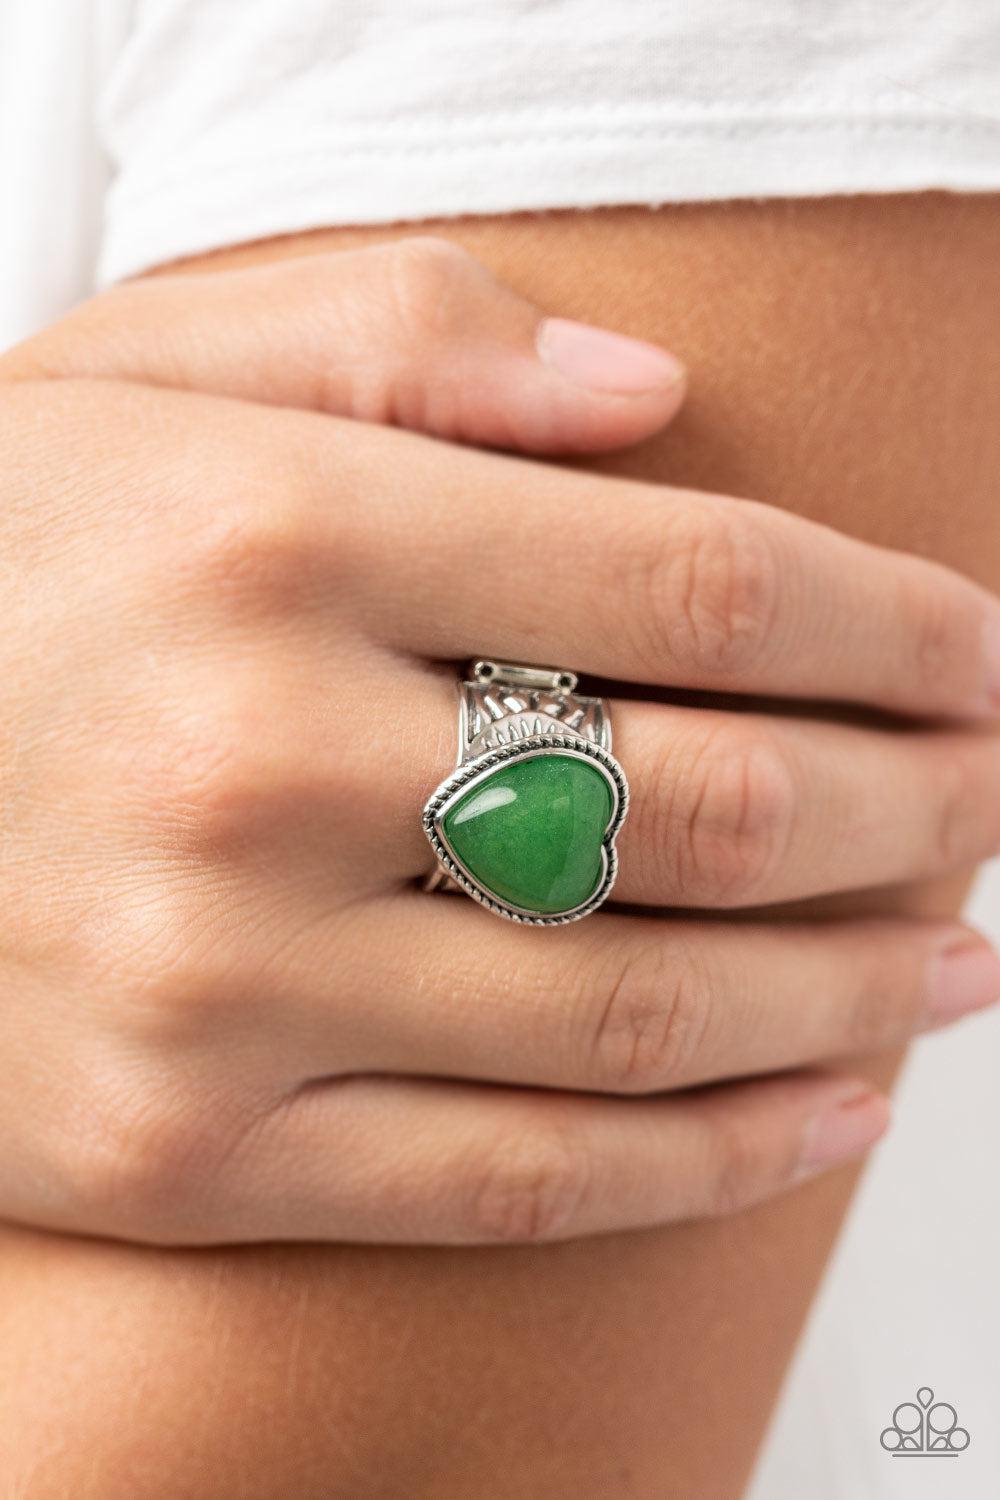 Stone Age Admirer Green Stone Heart Ring - Paparazzi Accessories-on model - CarasShop.com - $5 Jewelry by Cara Jewels